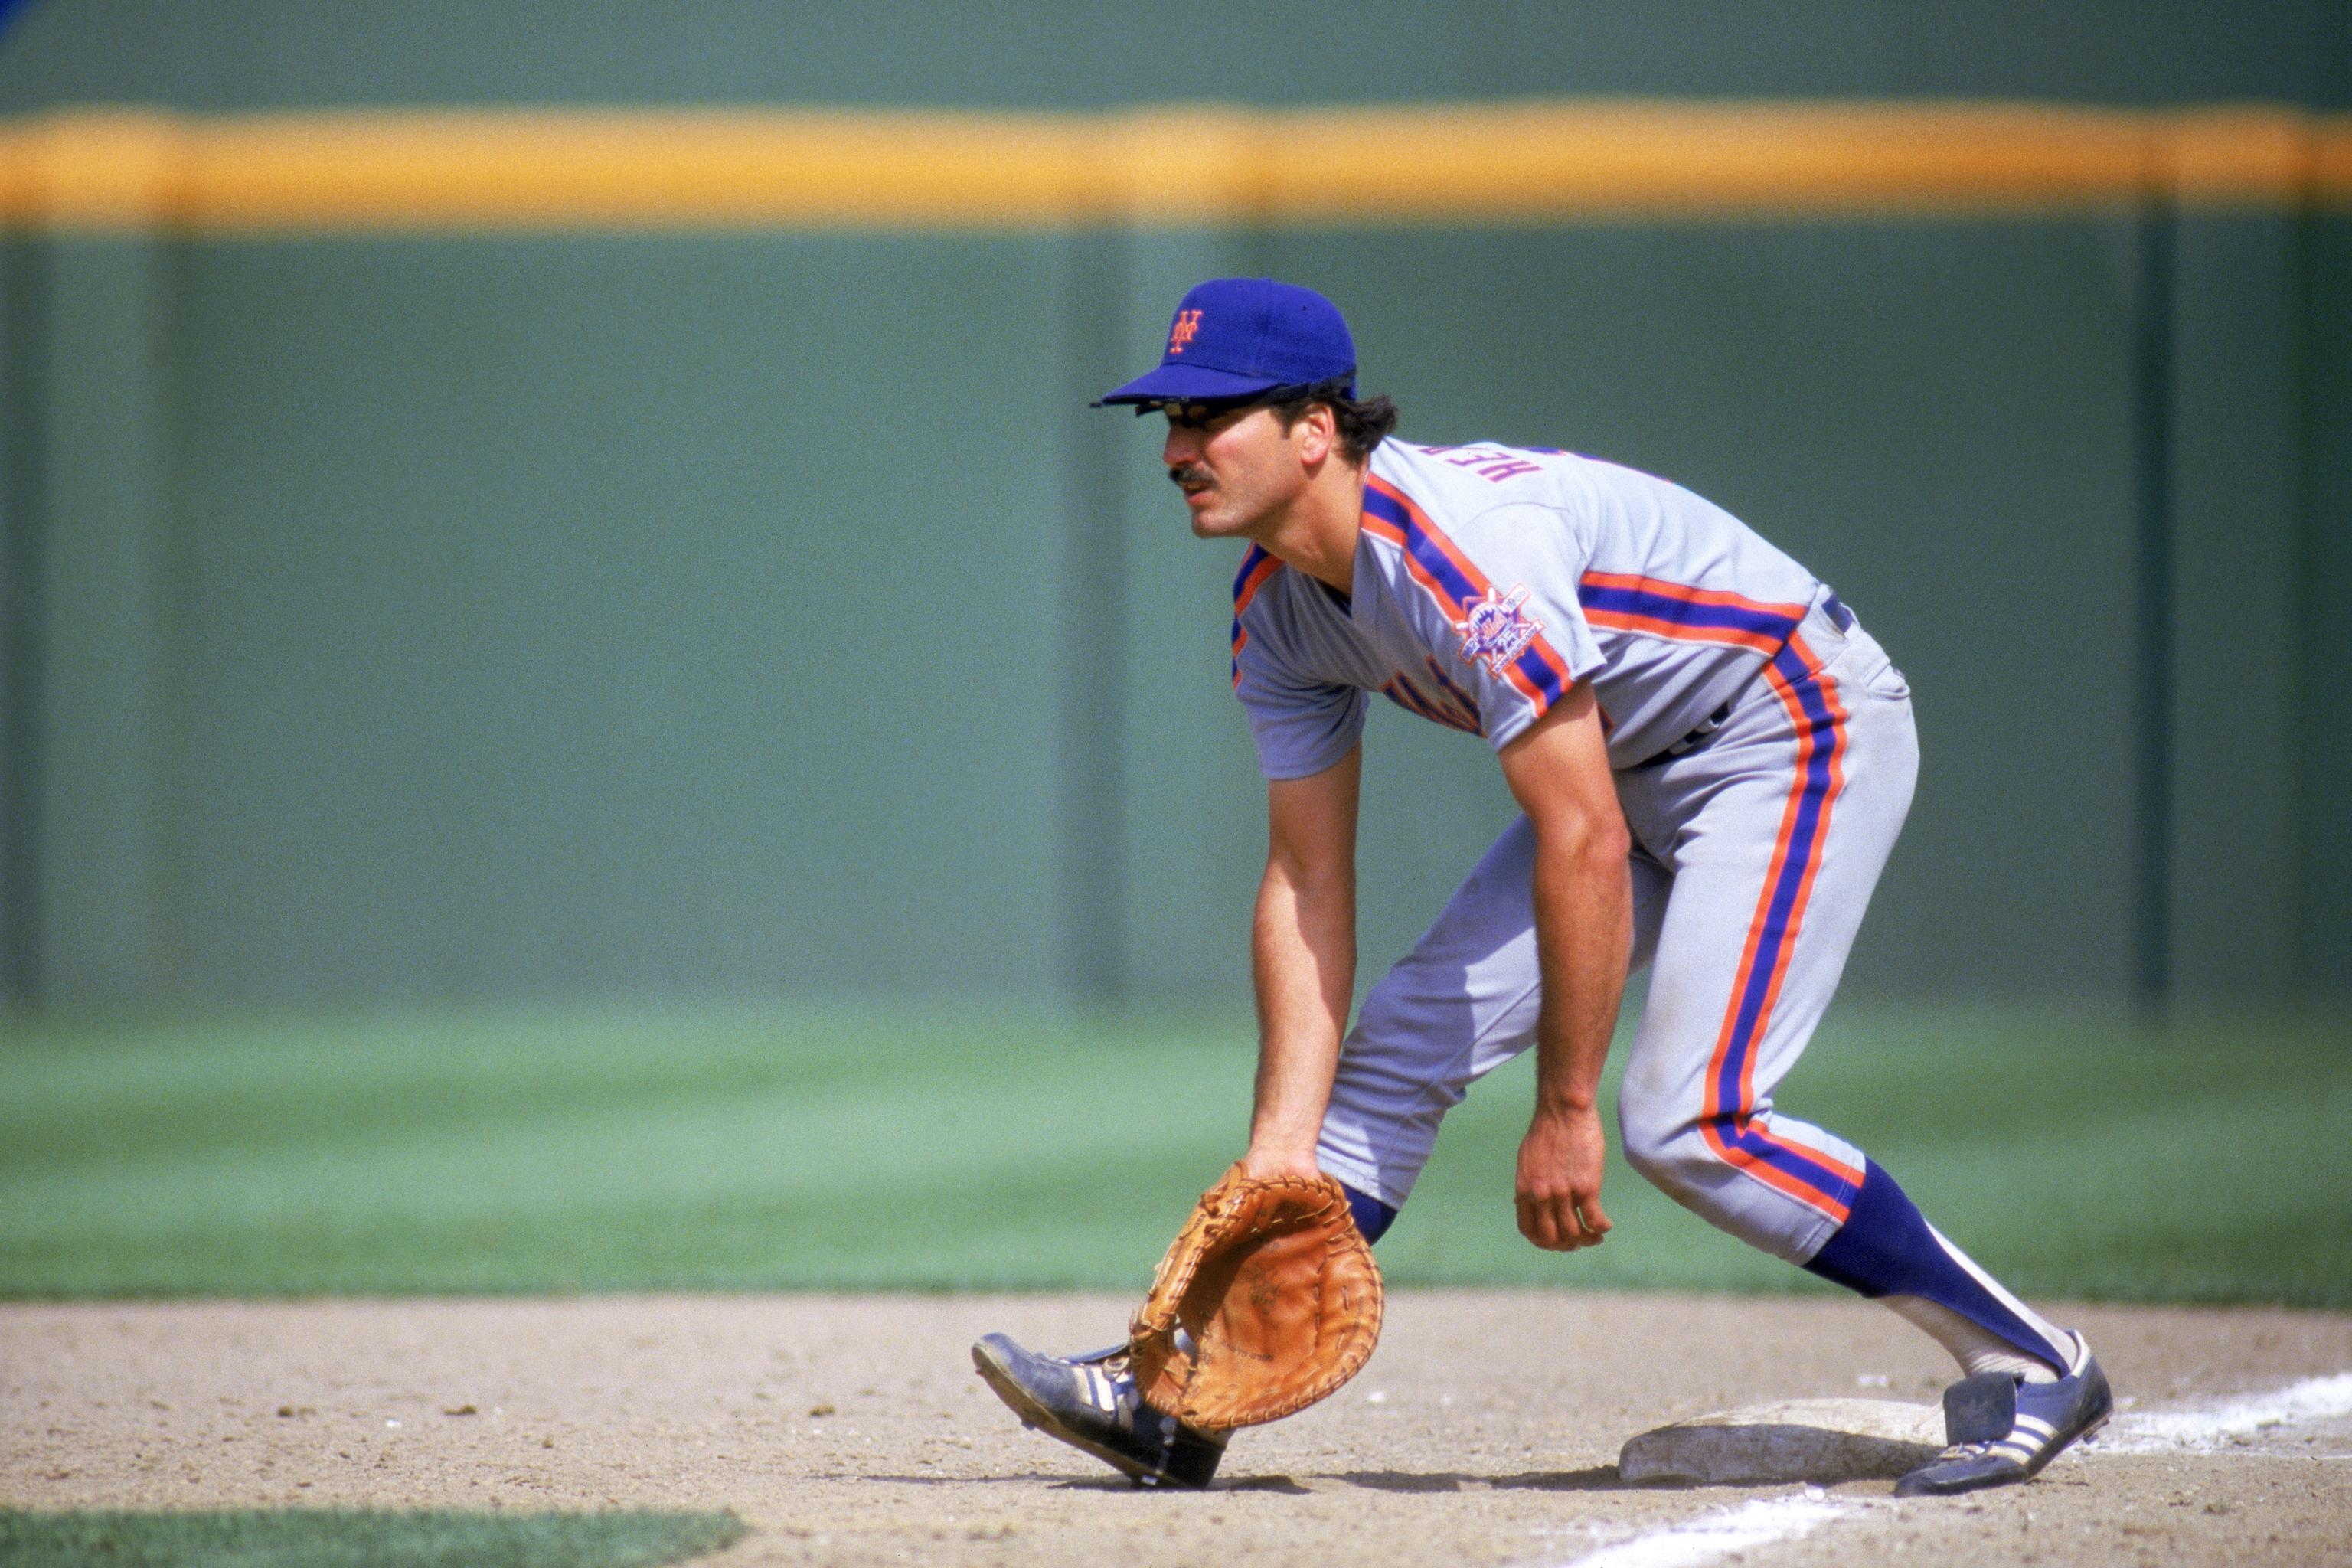 10 things you may not remember about the 1986 Mets